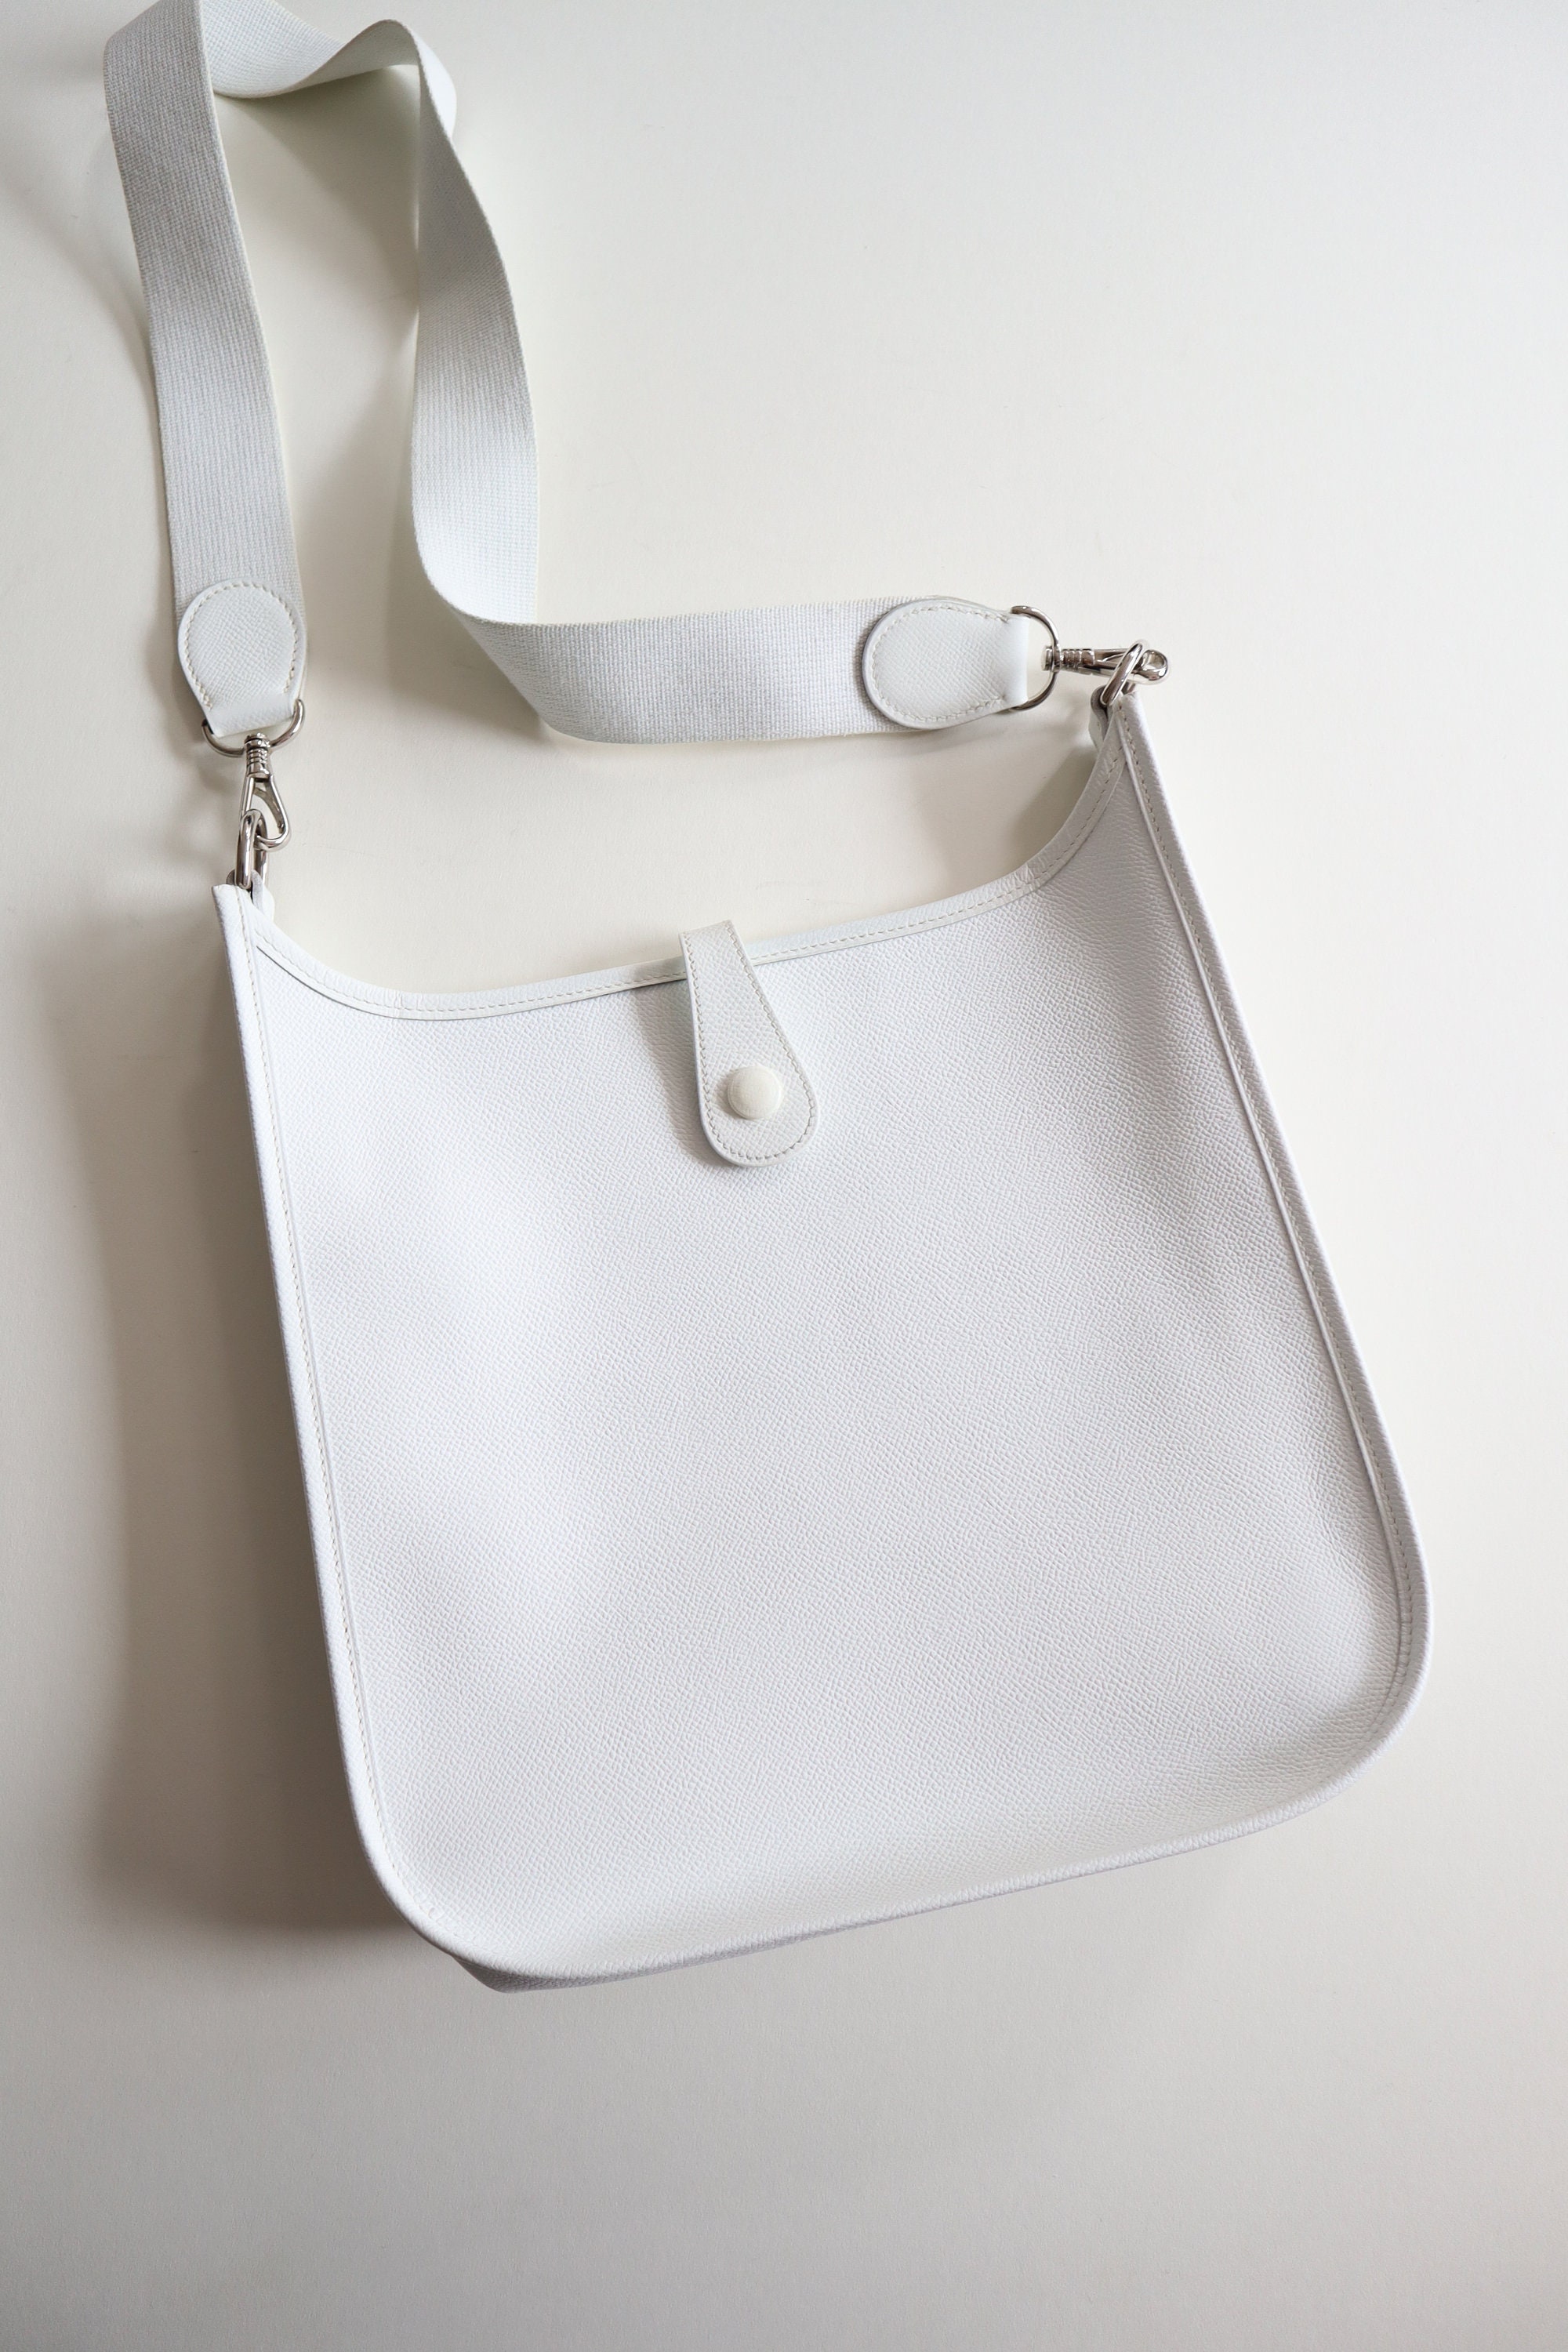 Hermes White Clemence Evelyne II PM, Sold Out Color at Hermes! Retail  $3300!